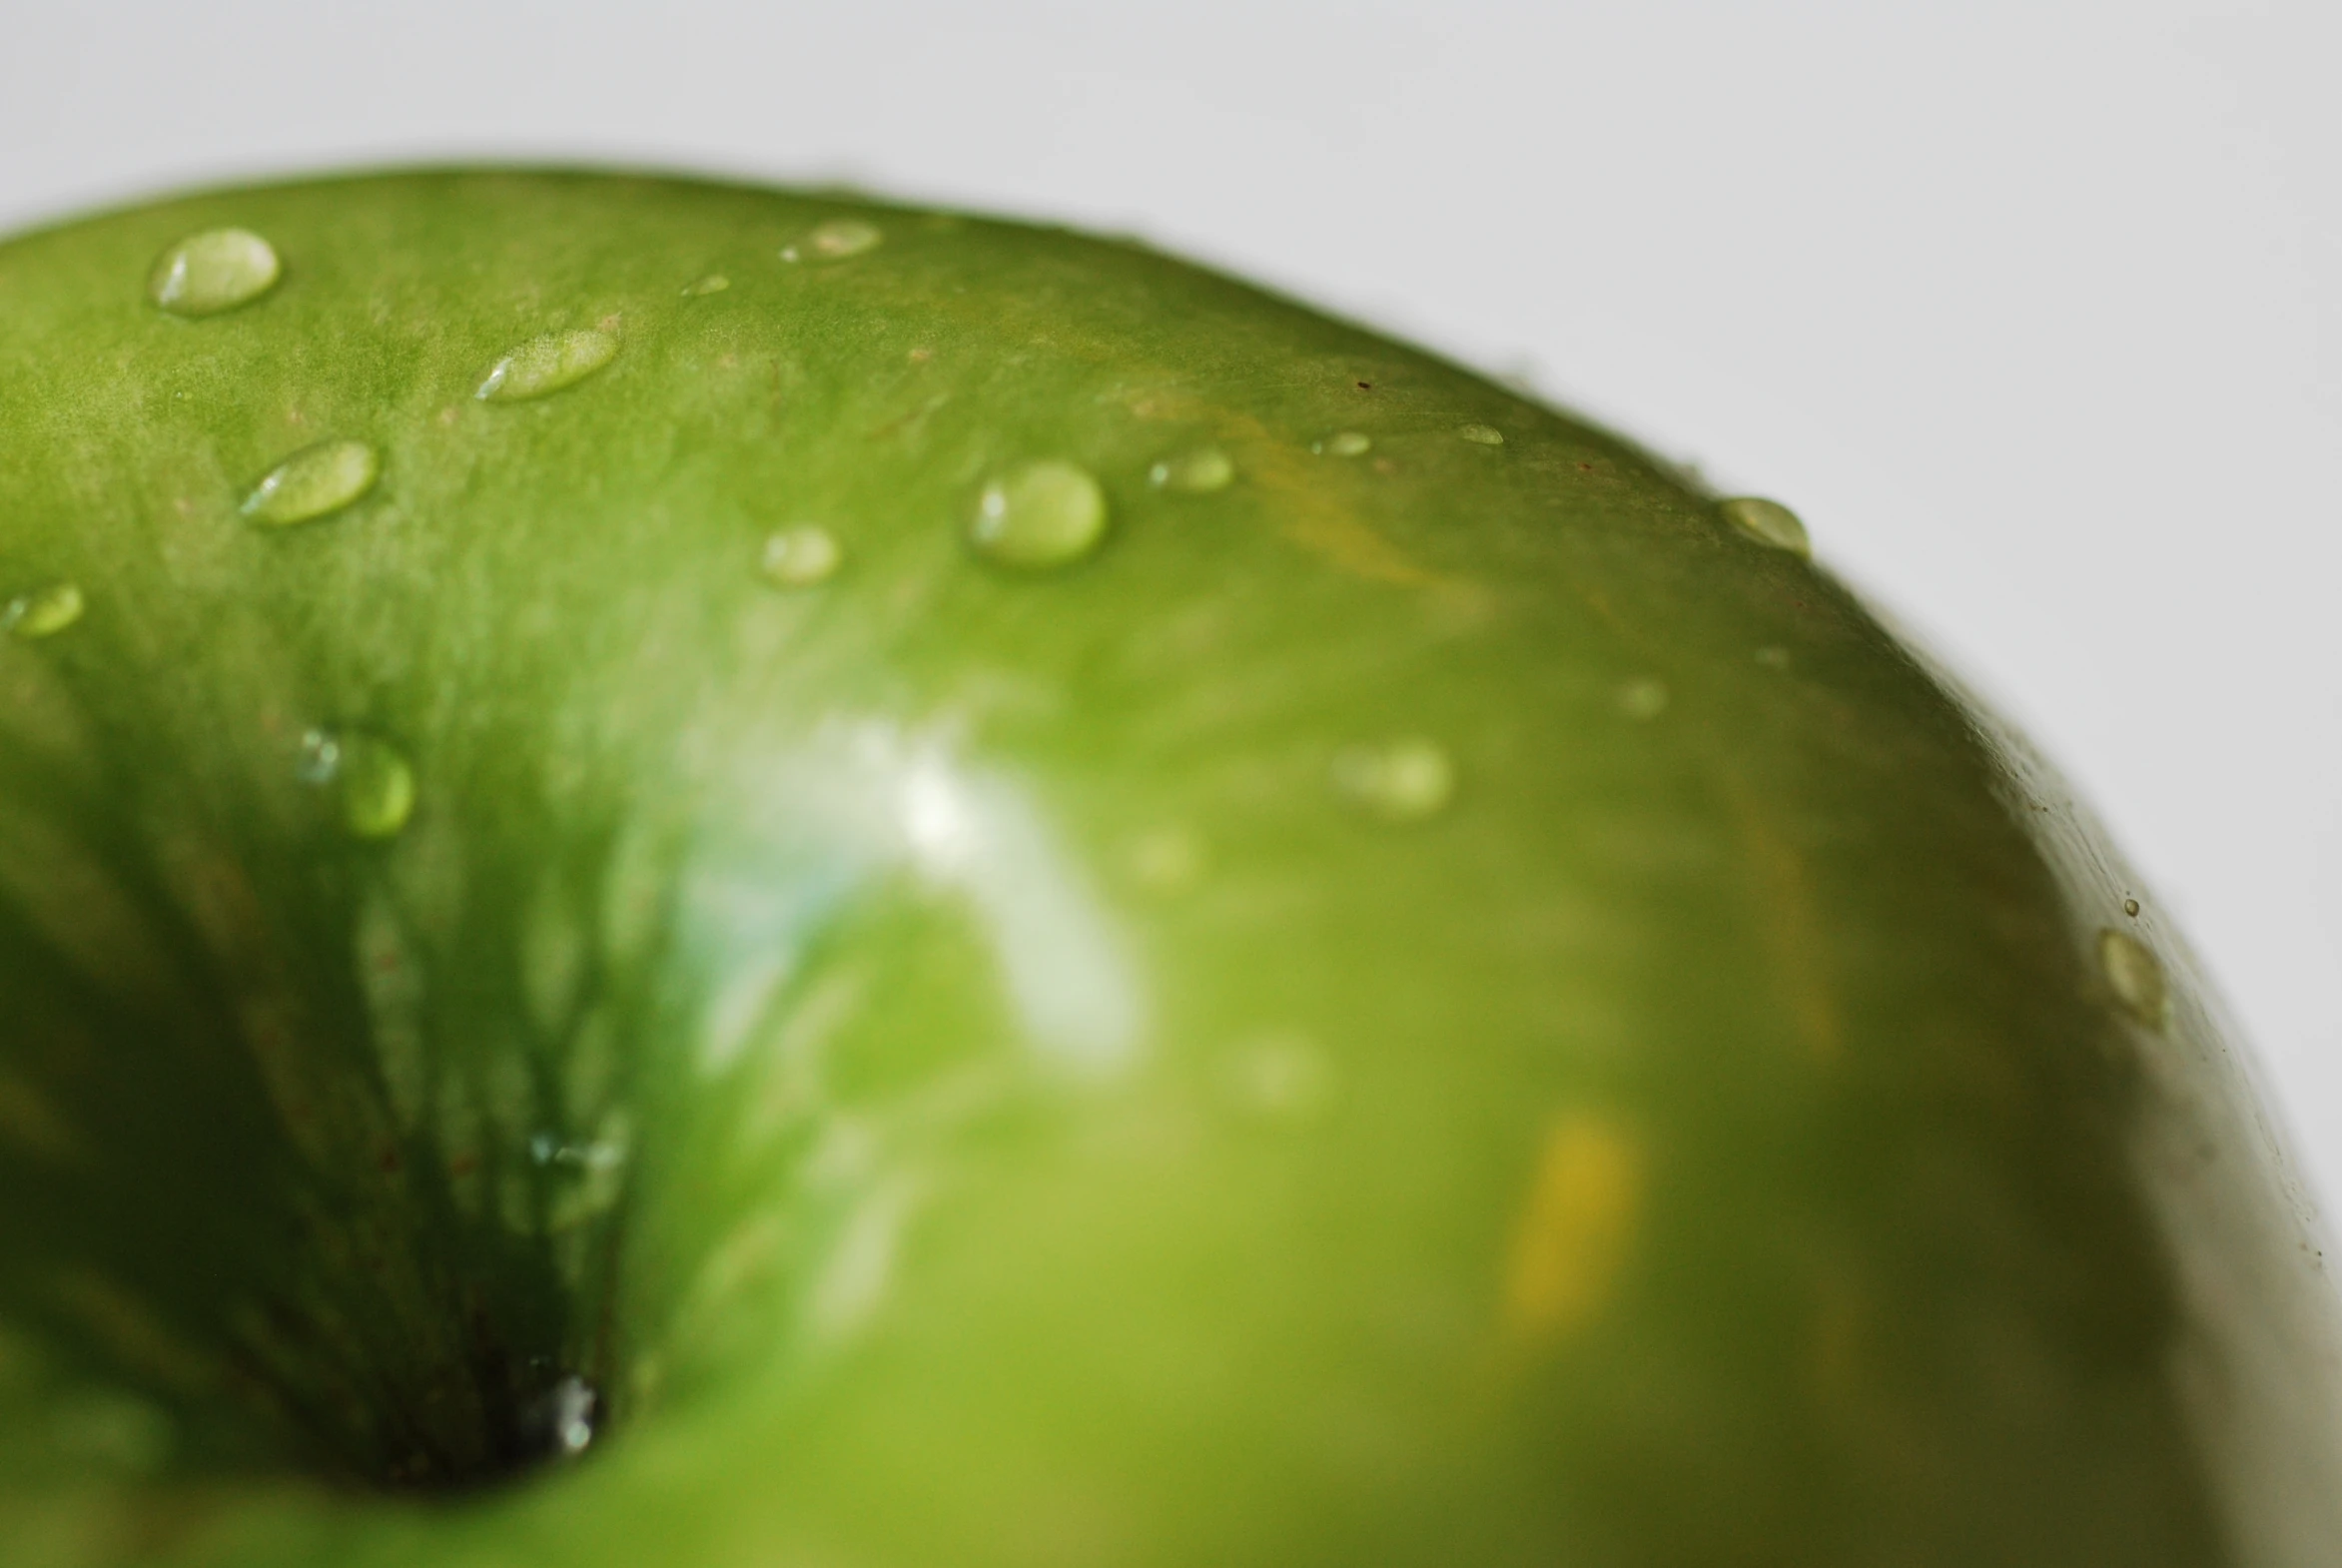 a green apple is sitting with water droplets